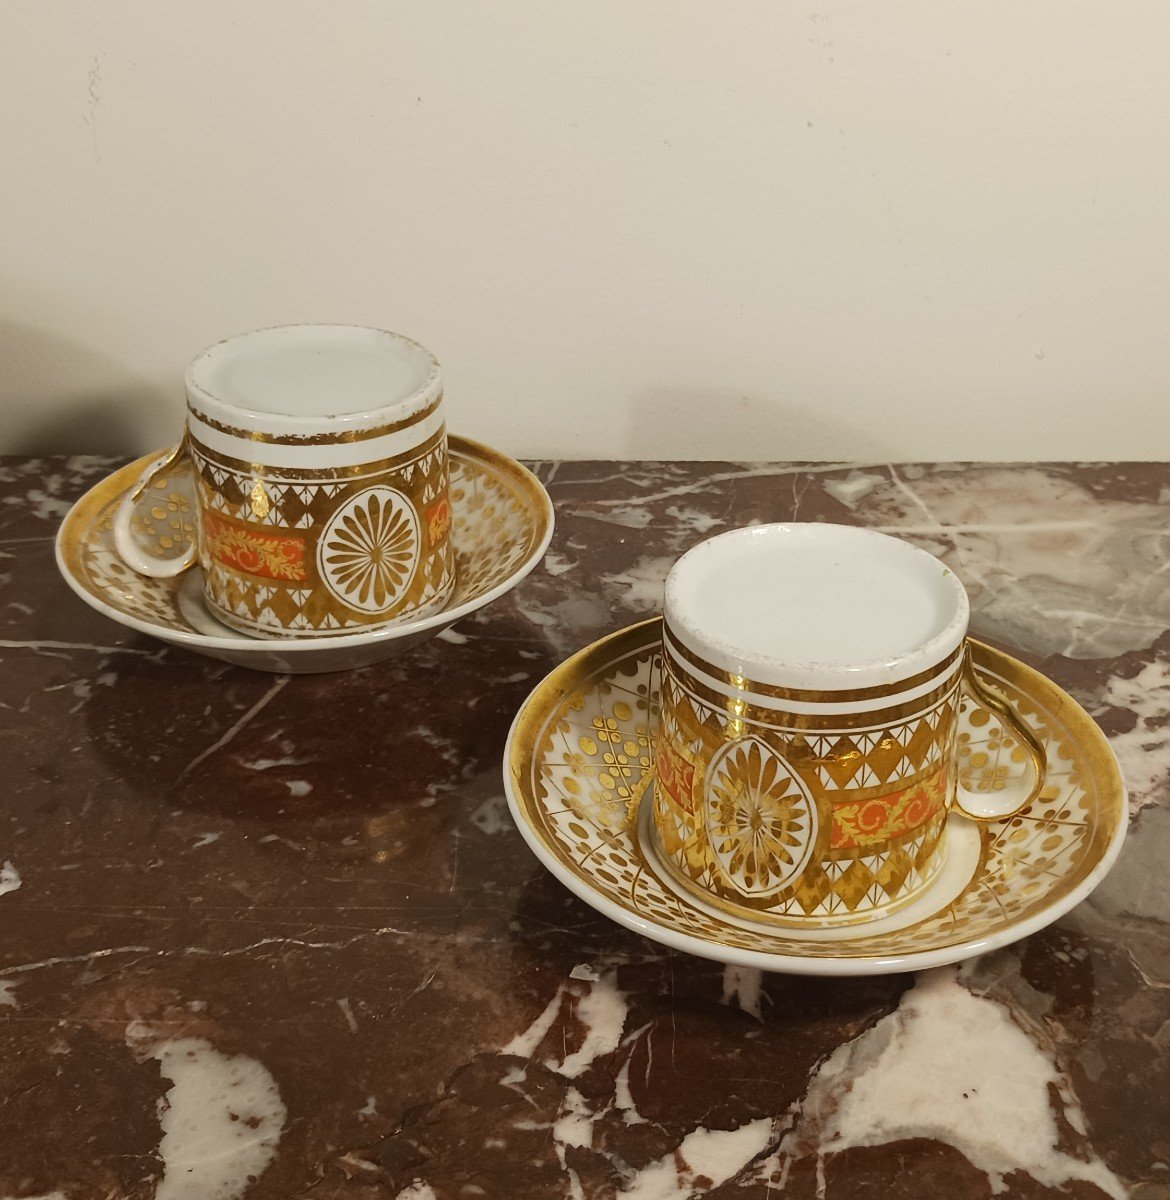 Paris, Revolution Or Empire Period - Pair Of Litron Cups And Saucers - Rich Gilded Decoration And Nankin Background-photo-4